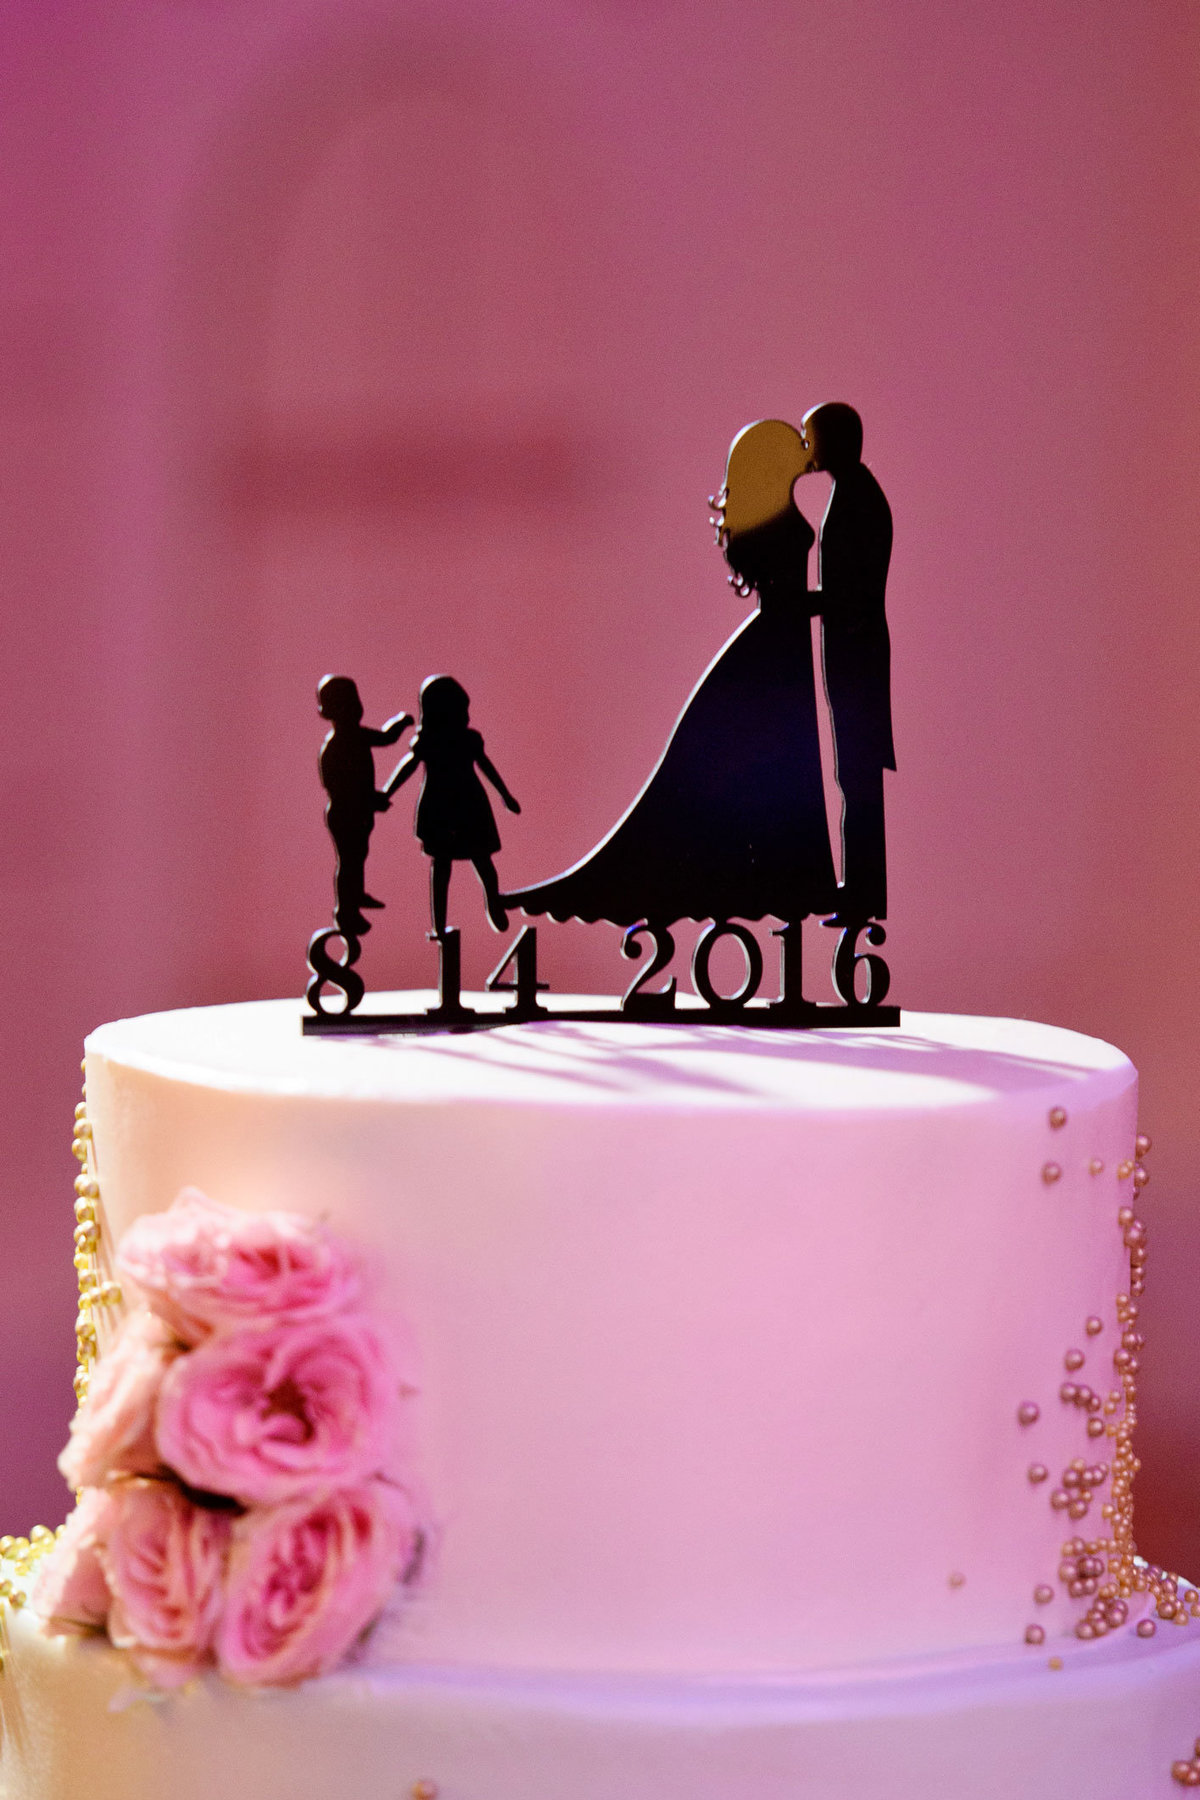 Wedding cake topper with date at The Sands